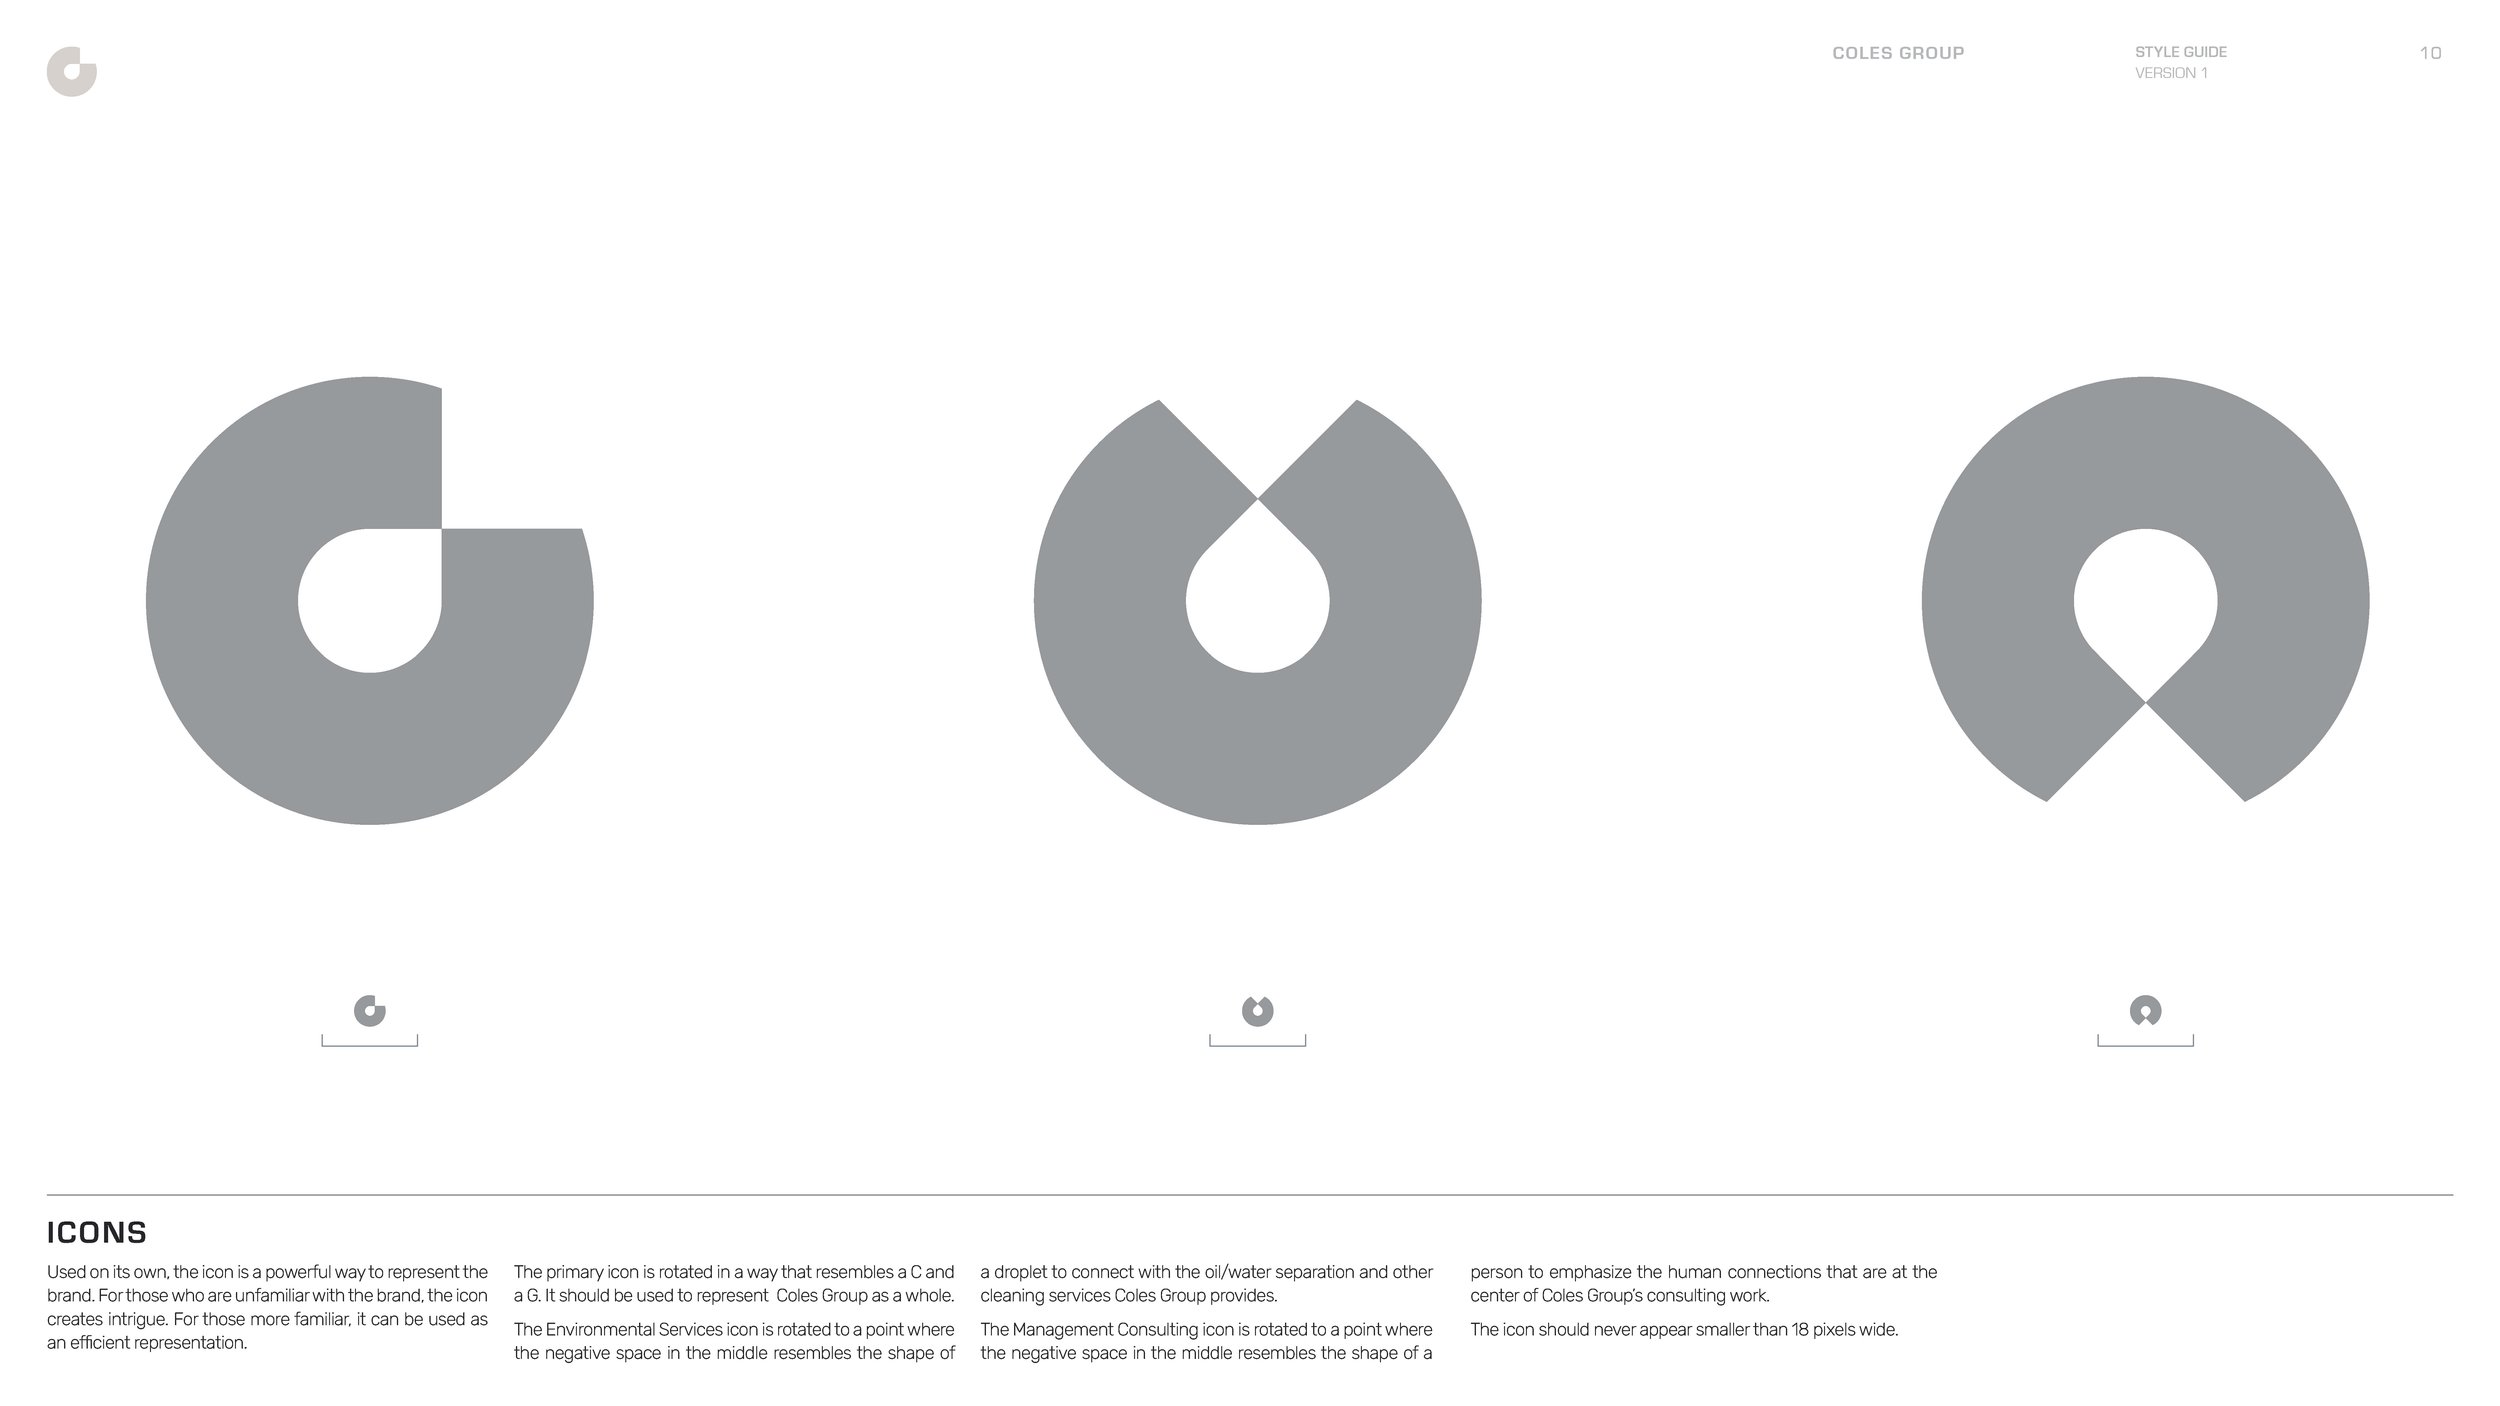 Coles-Group_Brand Guidelines_060321_Page_10.jpg